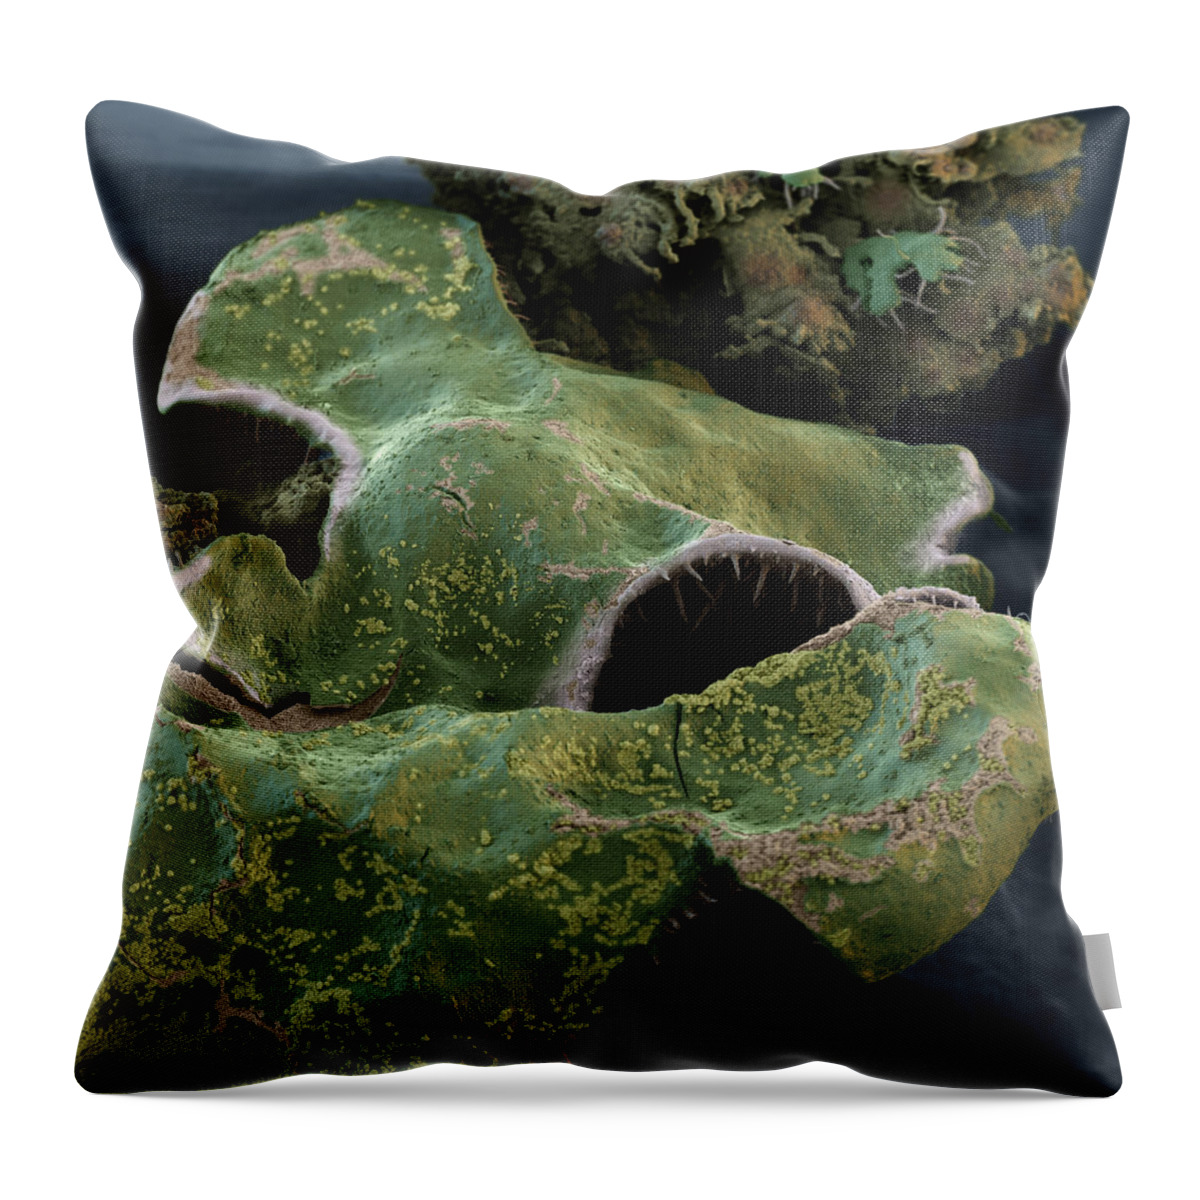 Algae Throw Pillow featuring the photograph Hammered Shield Lichen by Meckes/ottawa